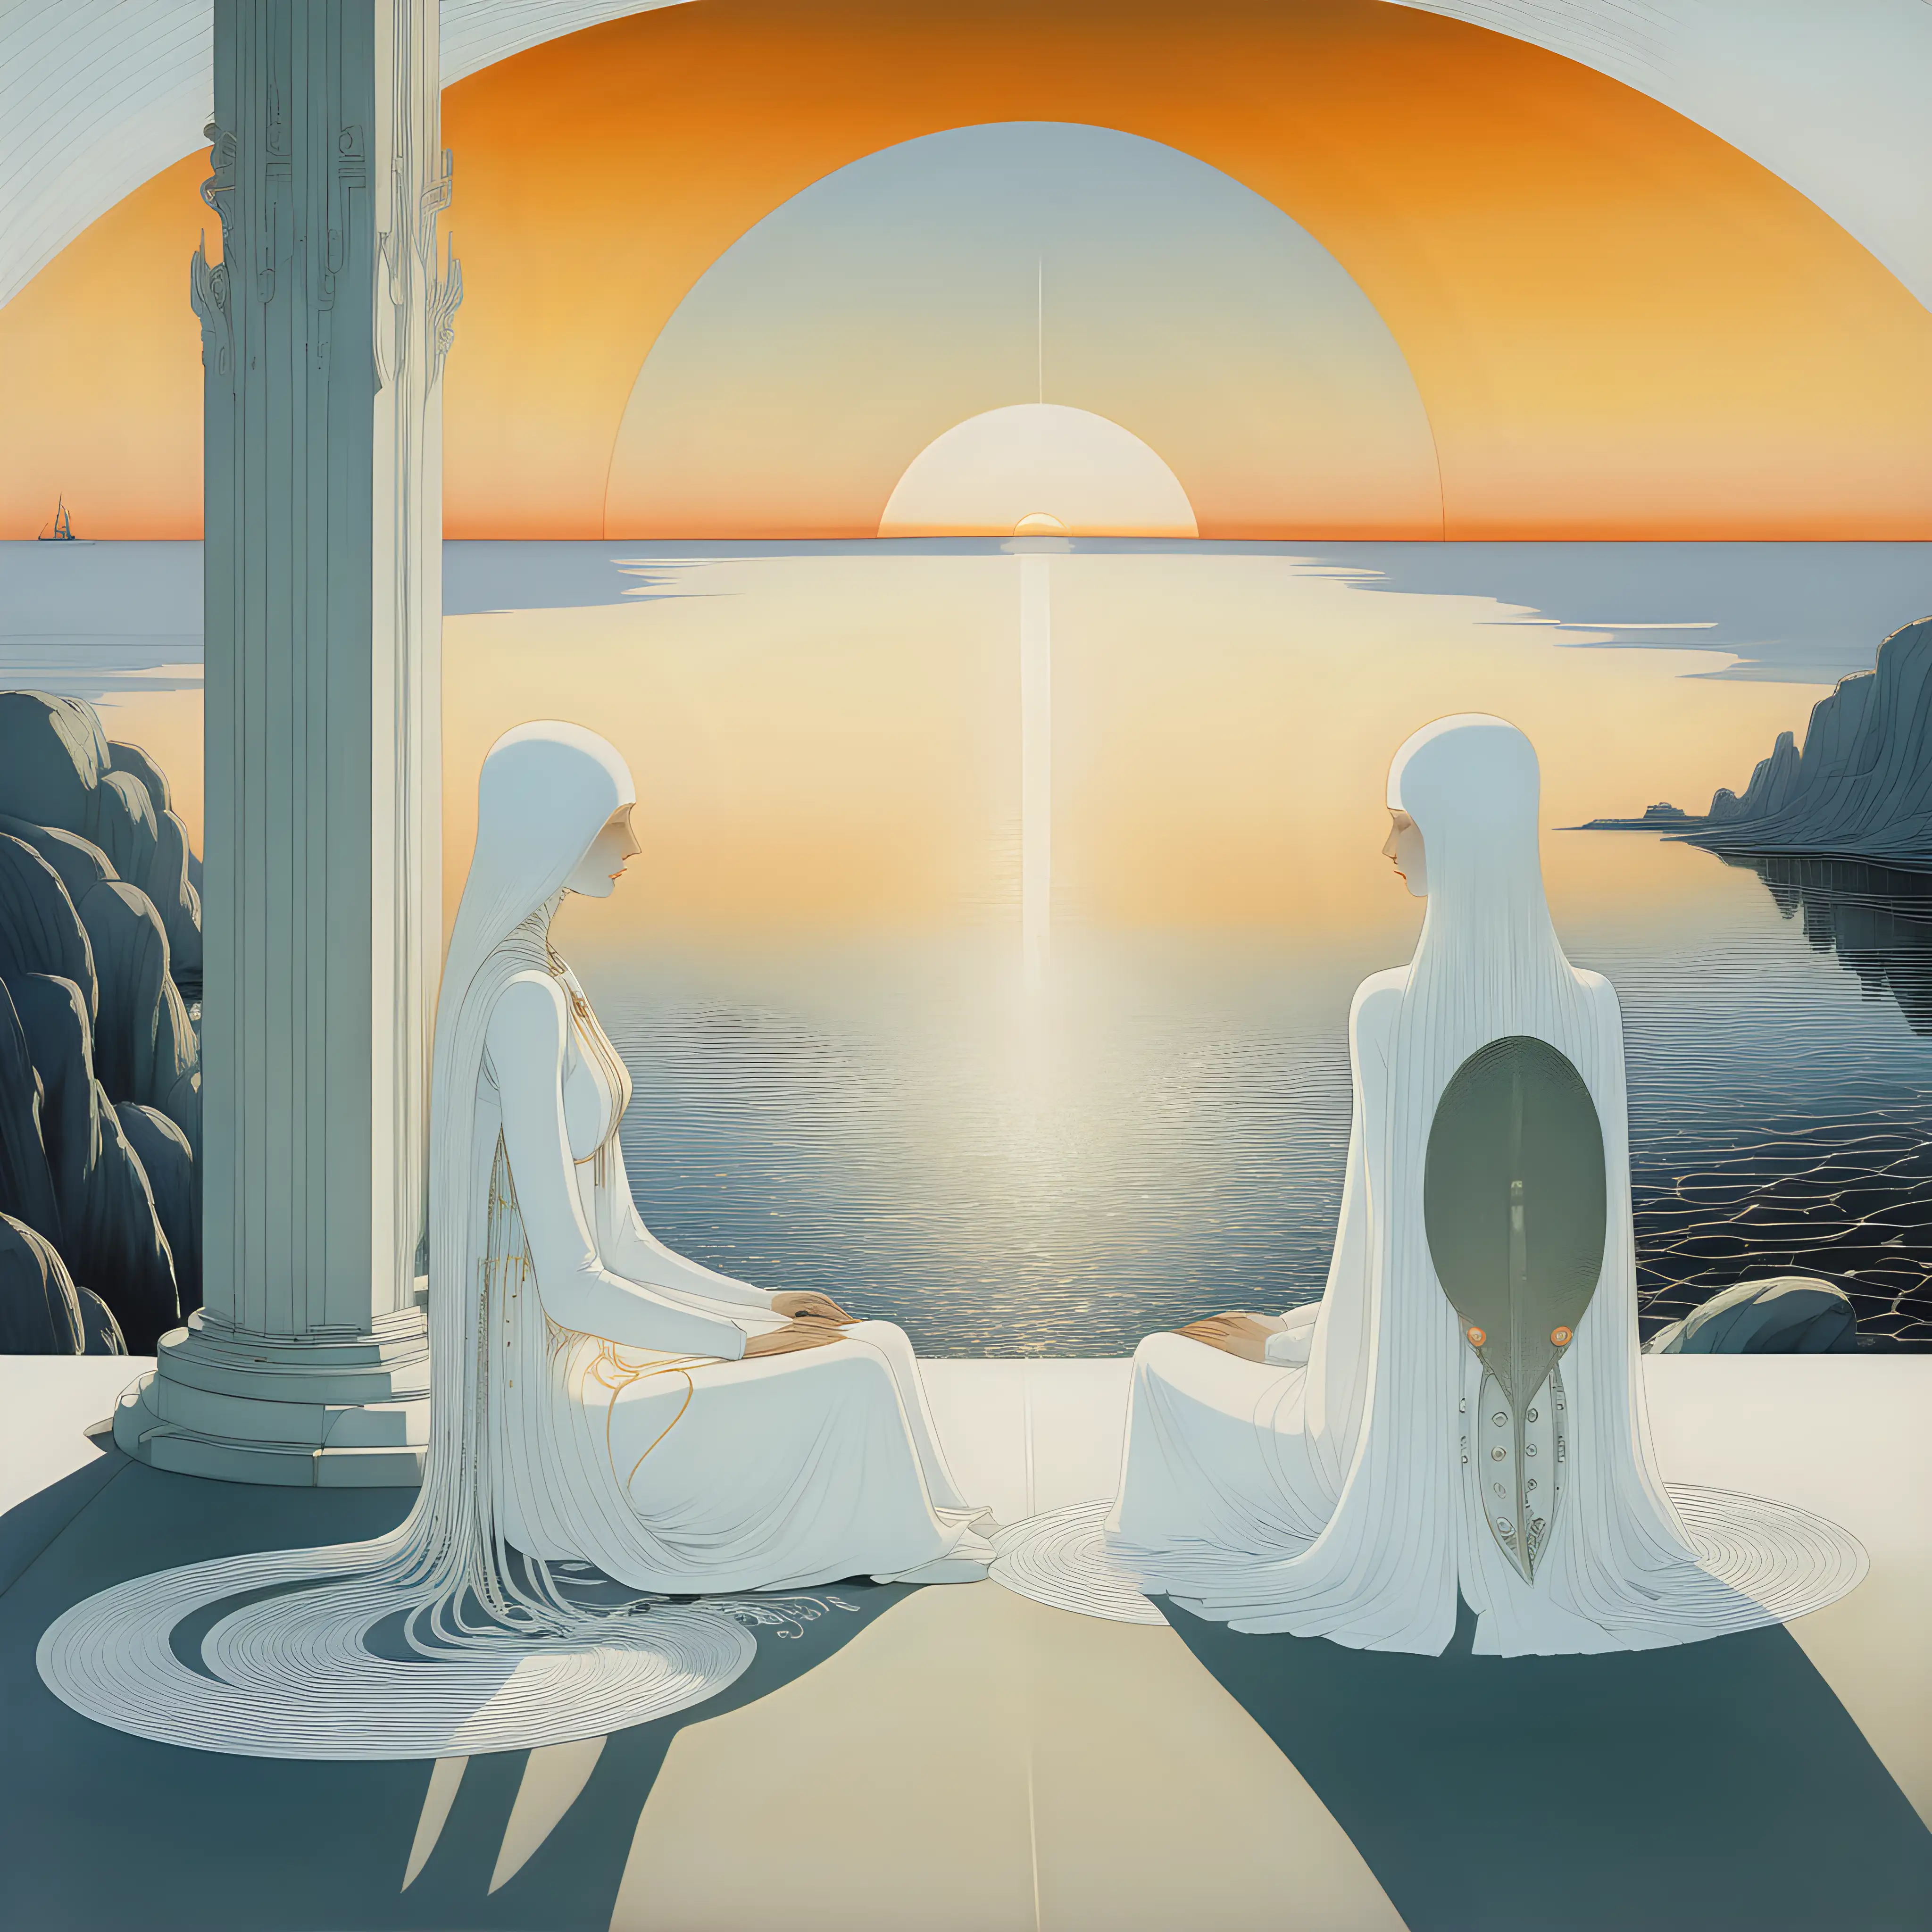 futuristic painting in kay nielsen style of two women and a man in white clothings sitting by an ocean watching sunset